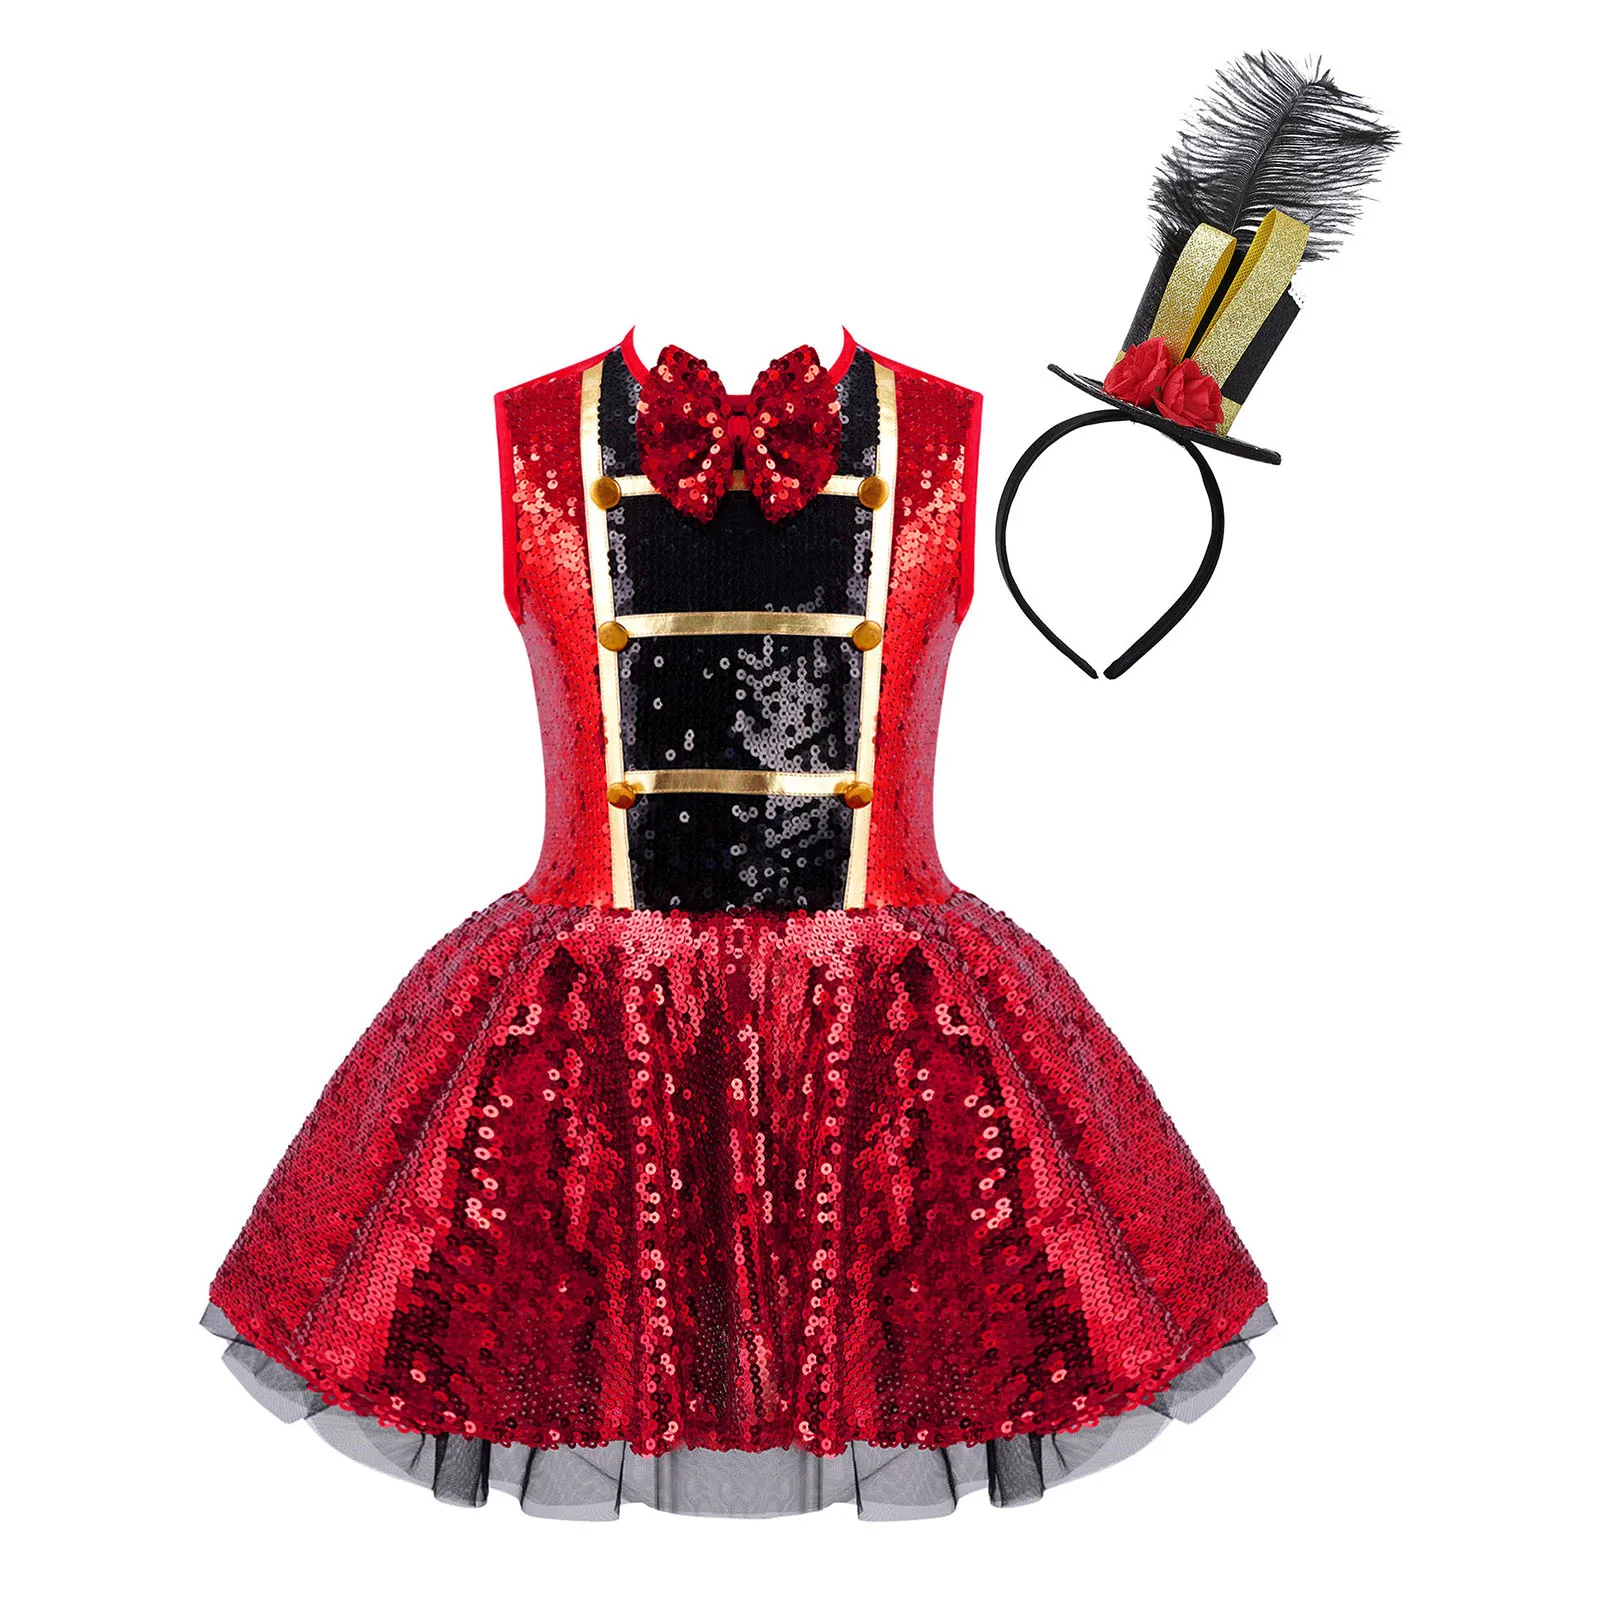 4-16 Years Girls Circus Ringmaster Costumes Shiny Sequins Leotard Dress with Feather Hat for Halloween Carnival Party Dress Up pirate costume women